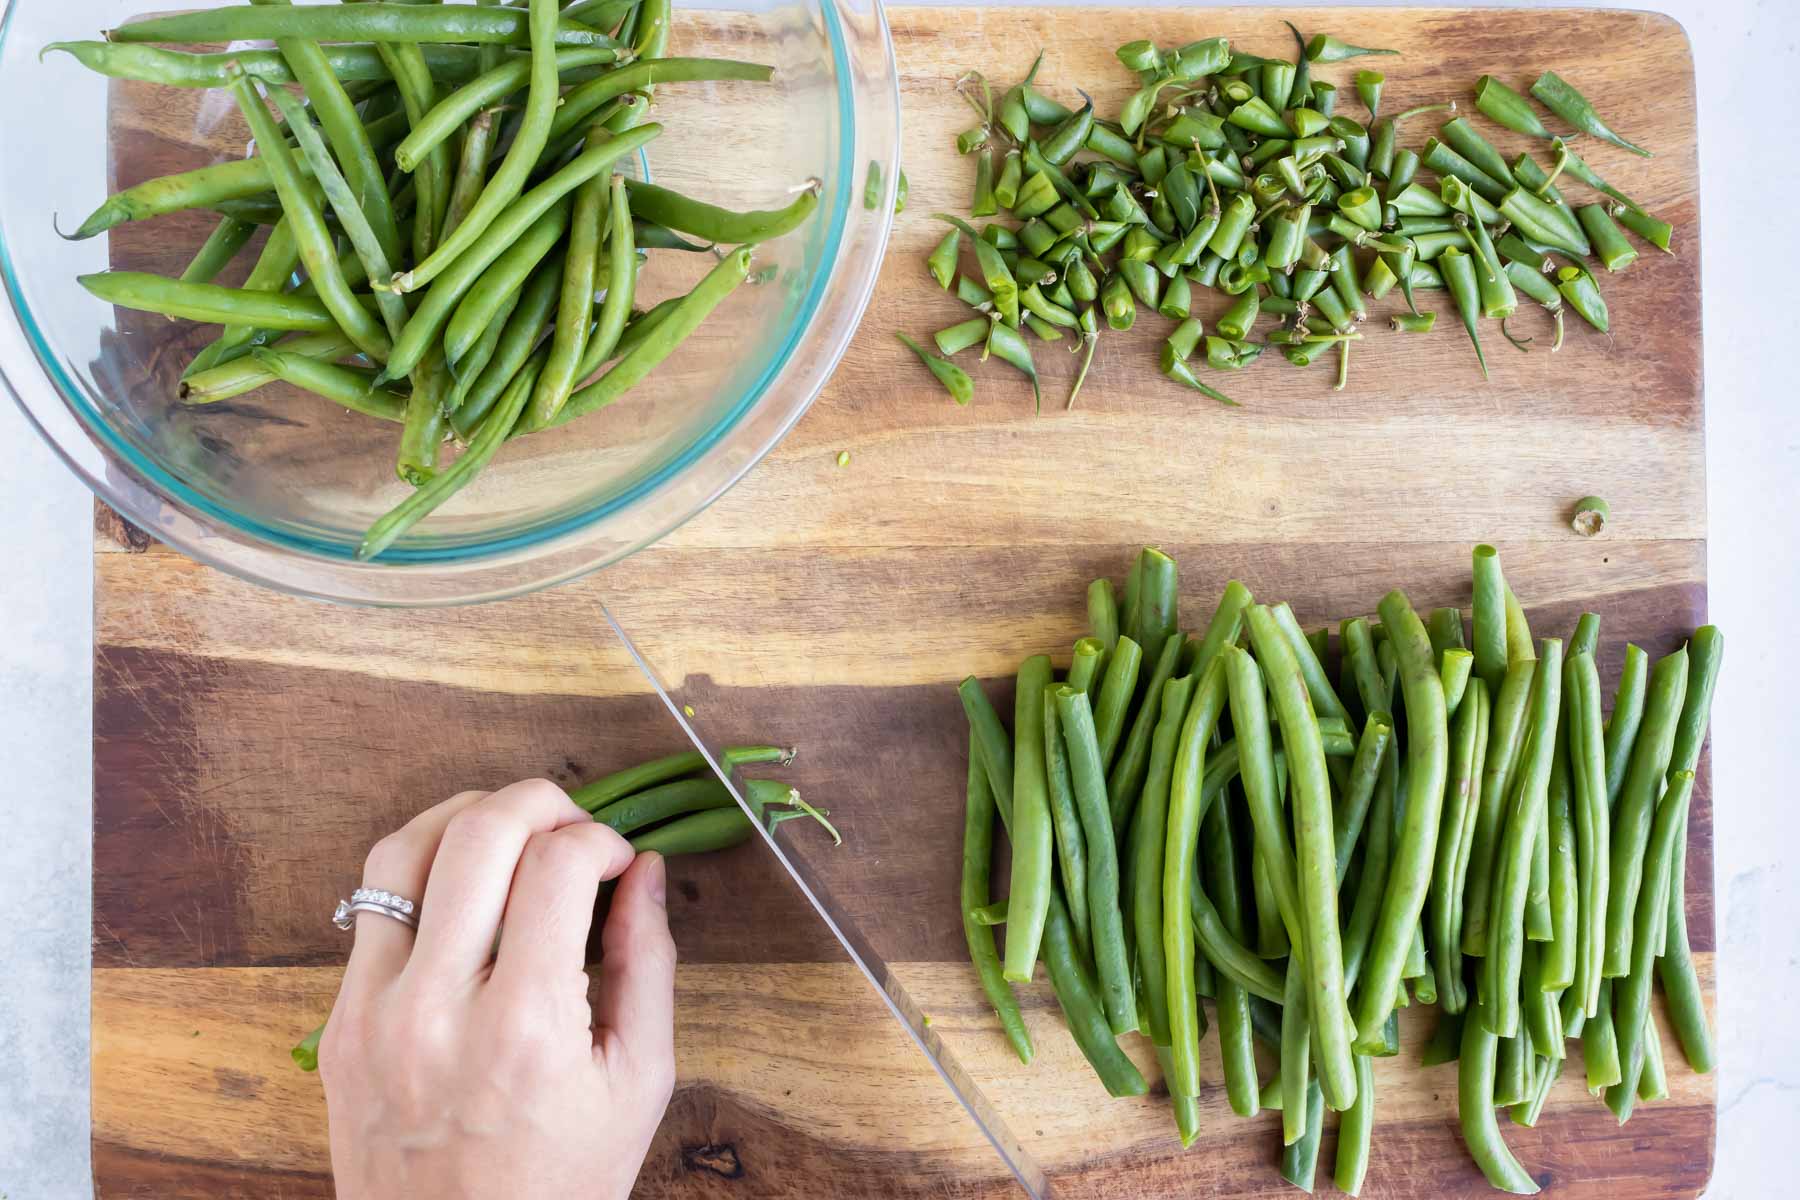 A knife slices the tips off green beans.